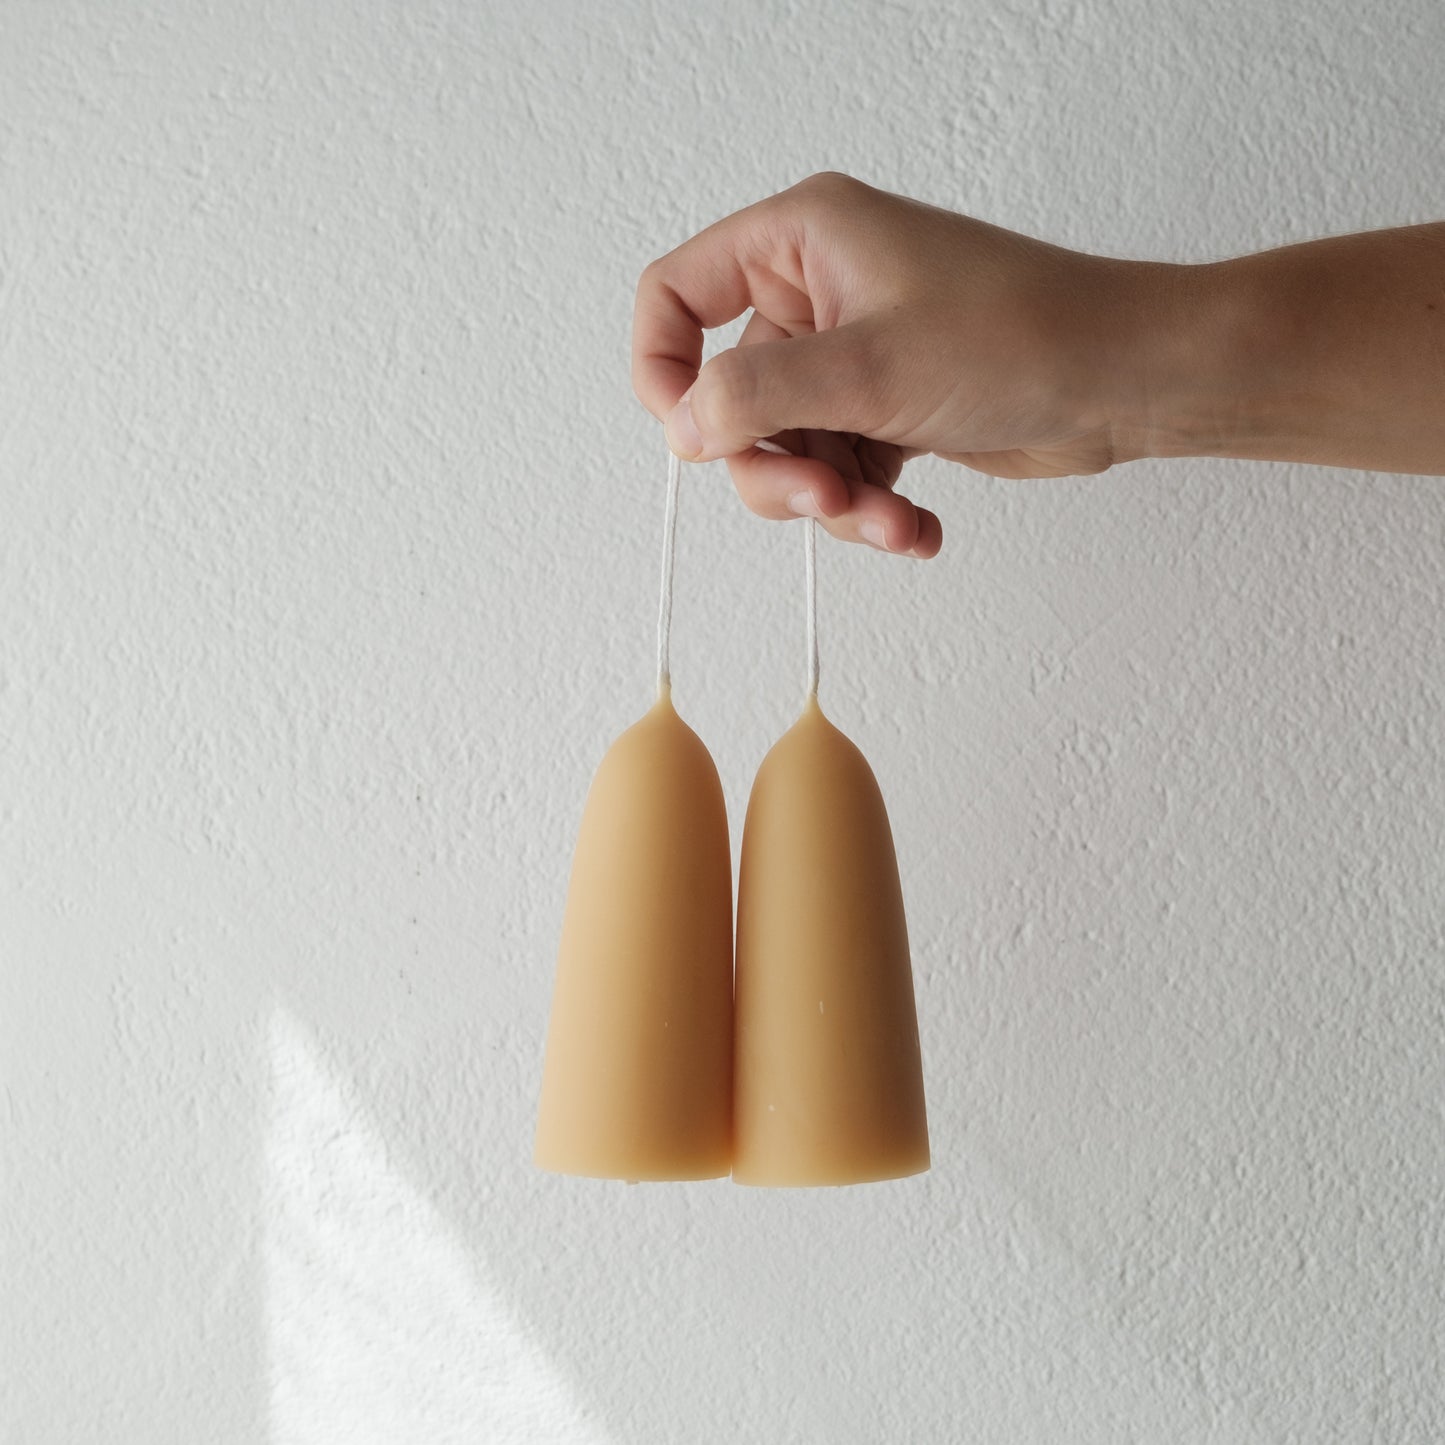 Beeswax Candle Stubby - Set of 2